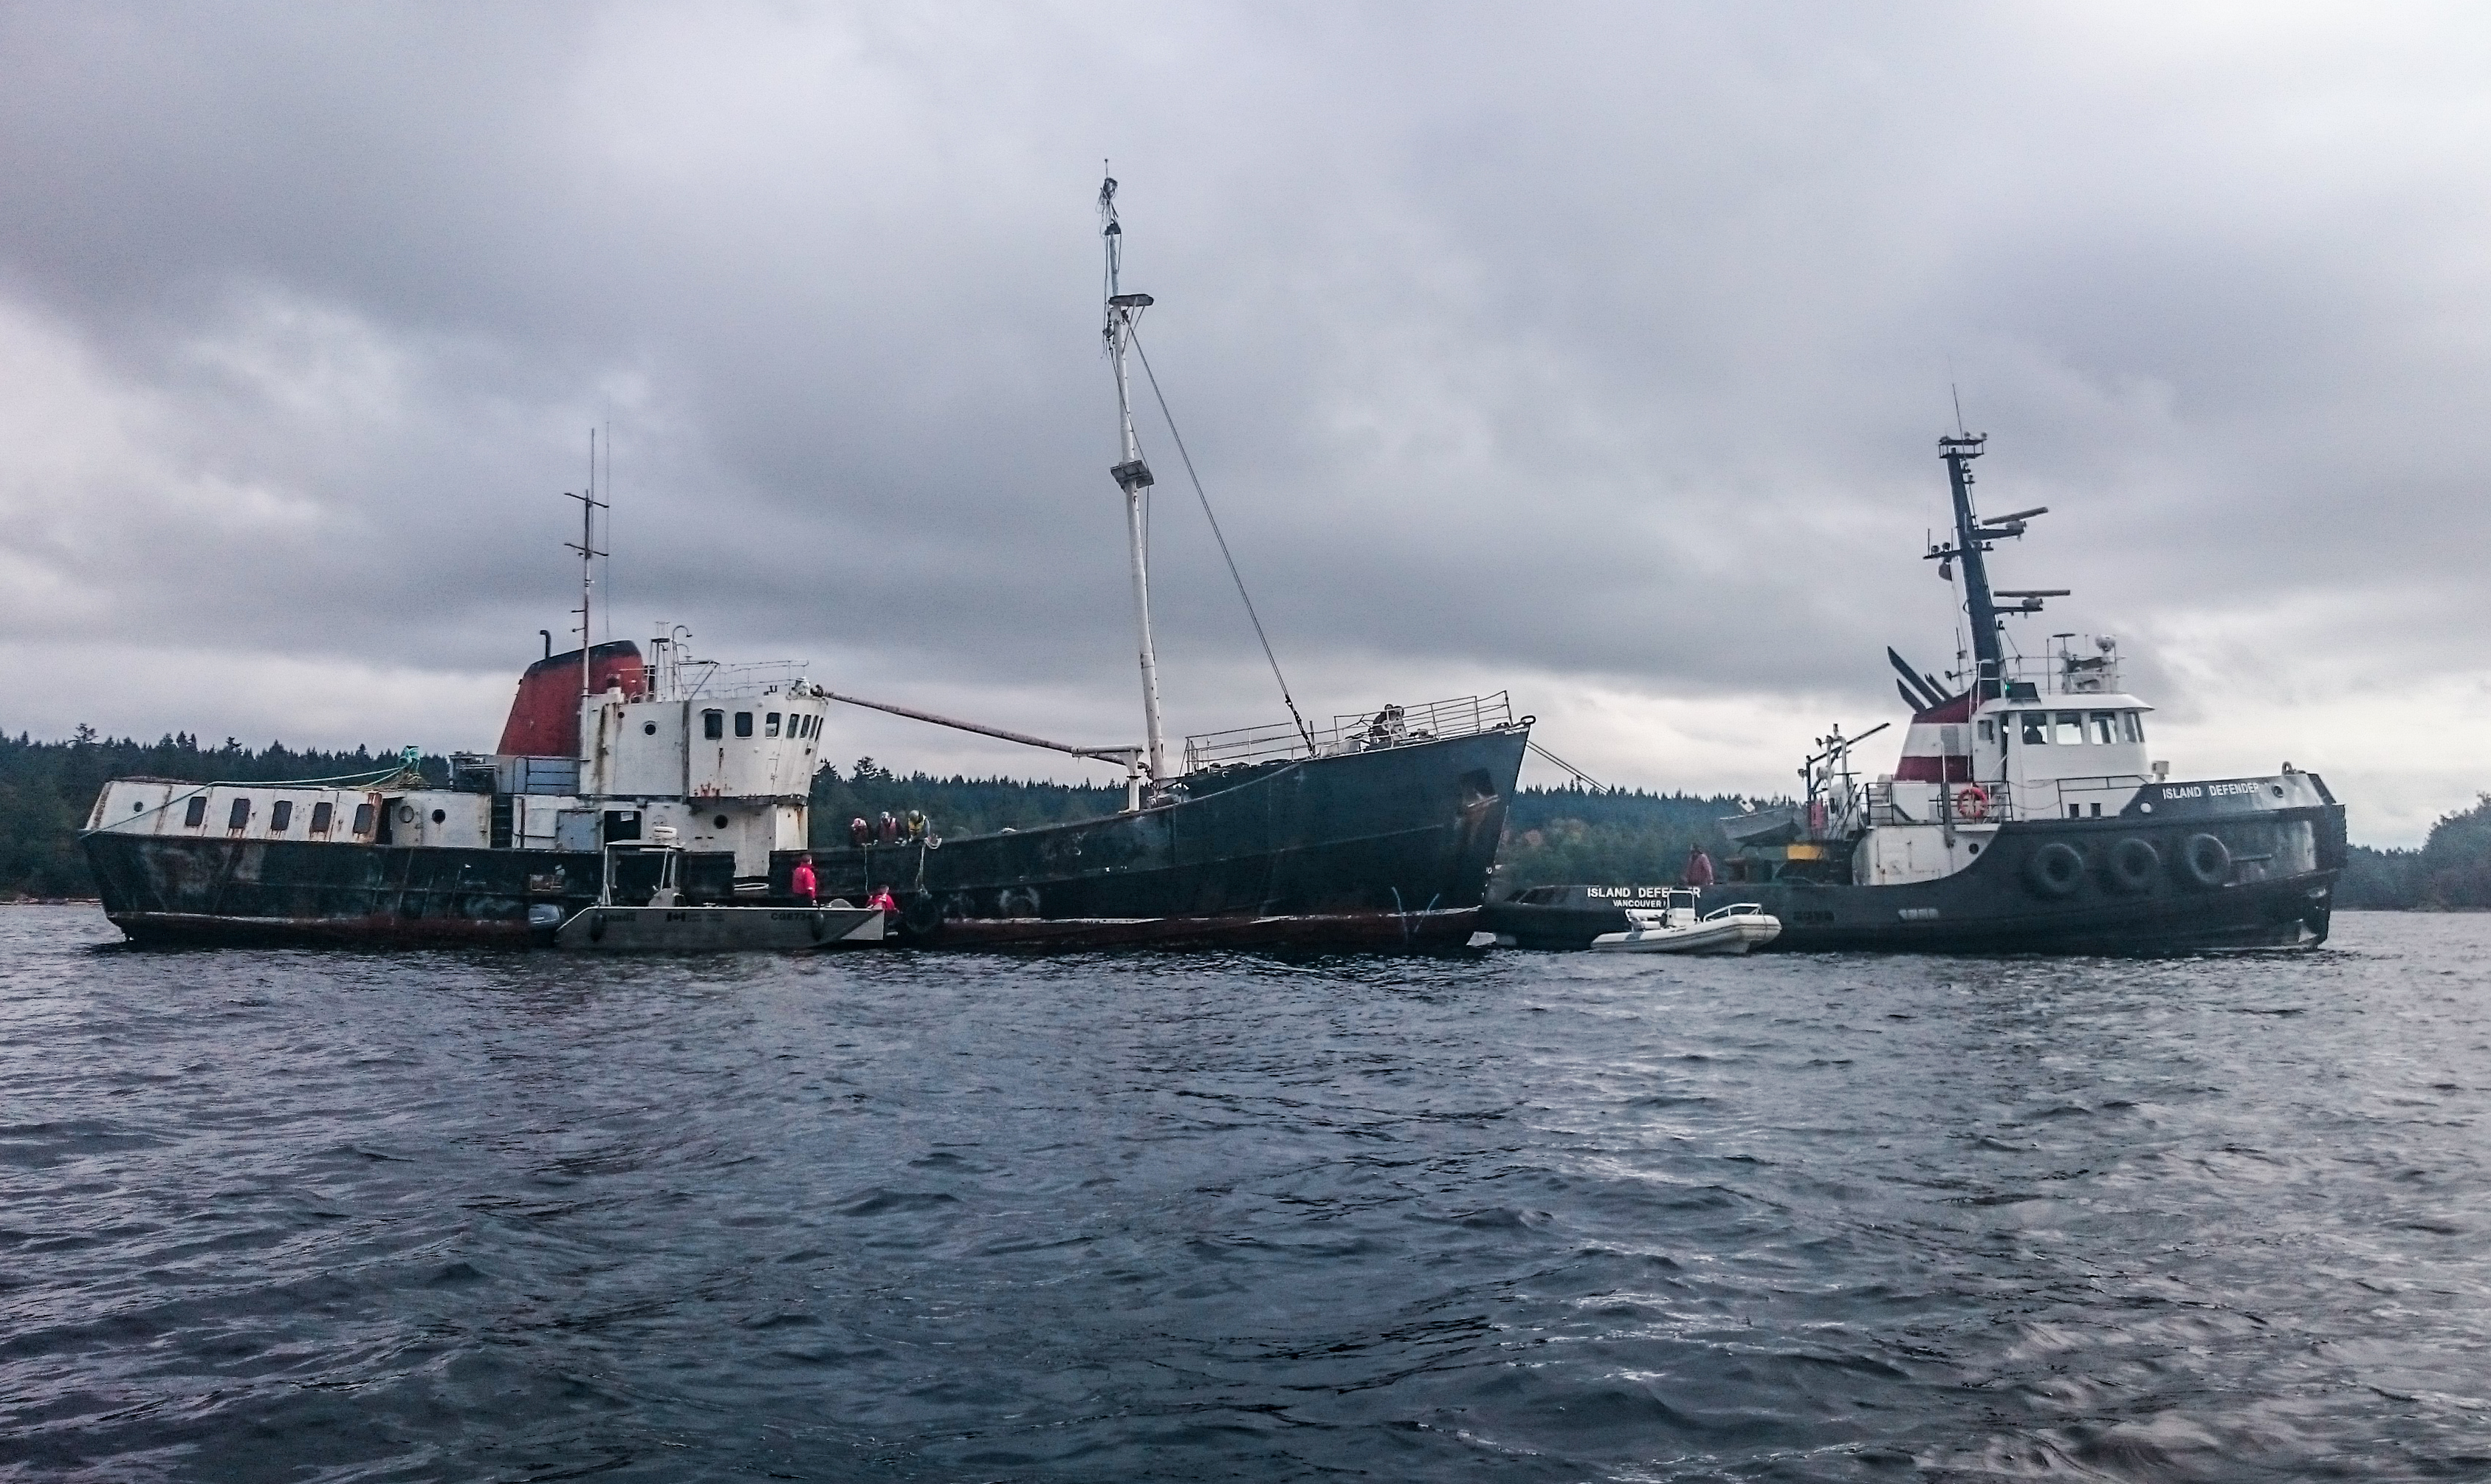 The abandoned and decaying Viki Lyne II is finally being towed away for safe dismantling after sitting in Ladysmith Harbour since 2012.